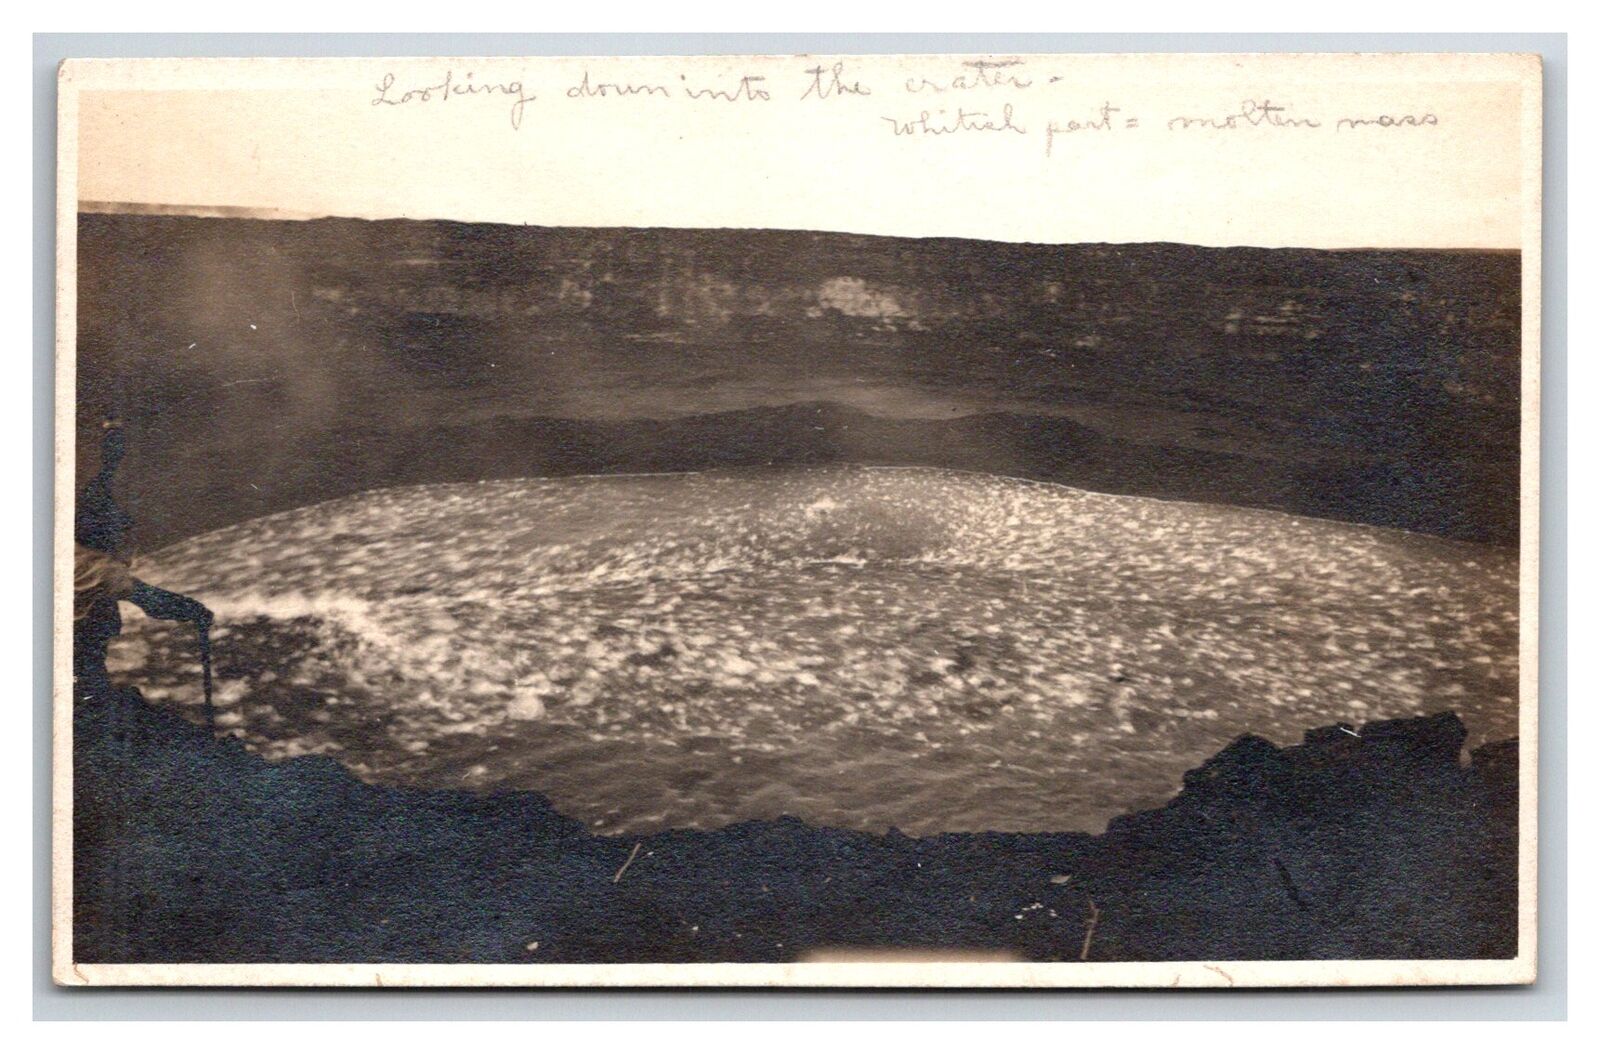 Lava filled Crater RPPC 1910c Halemaumau Volcano crater HILO hawaii